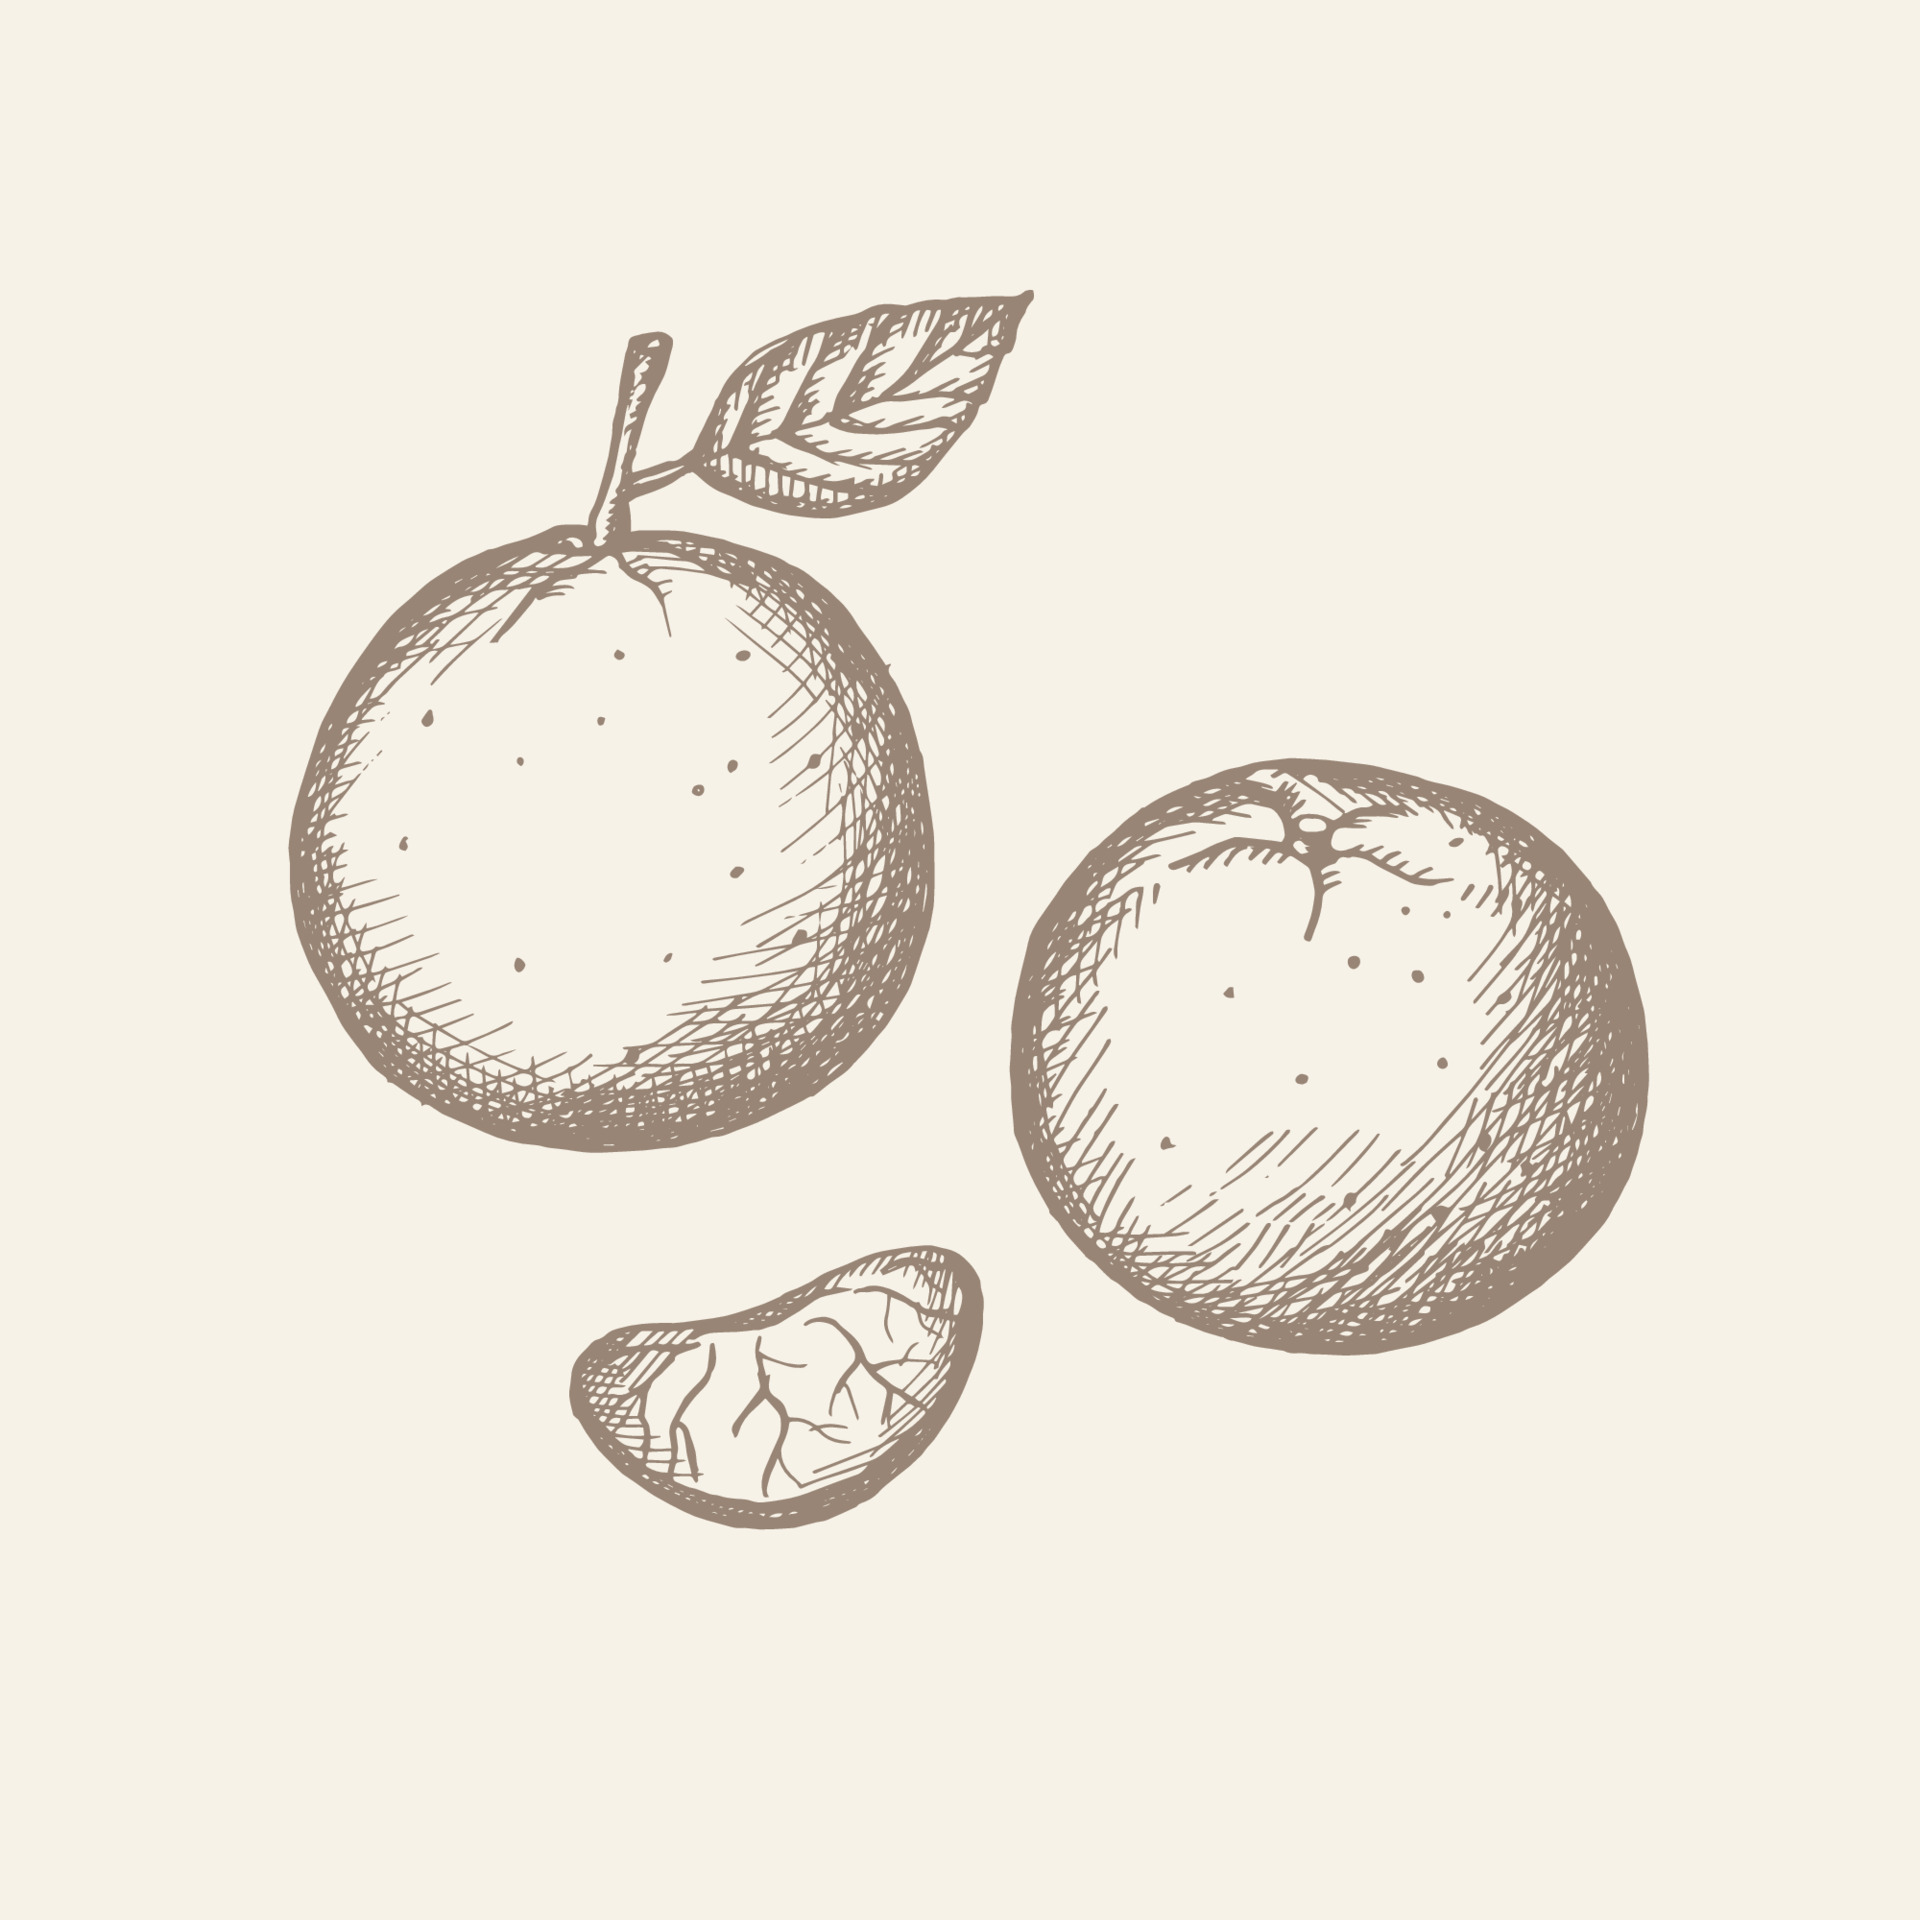 https://static.vecteezy.com/system/resources/previews/023/587/538/original/drawn-tangerine-clementine-vintage-style-color-illustration-of-a-fruit-of-a-citrus-plant-with-leaves-a-segment-of-a-mandarin-fruit-illustration-isolated-white-background-hand-drawn-vector.jpg